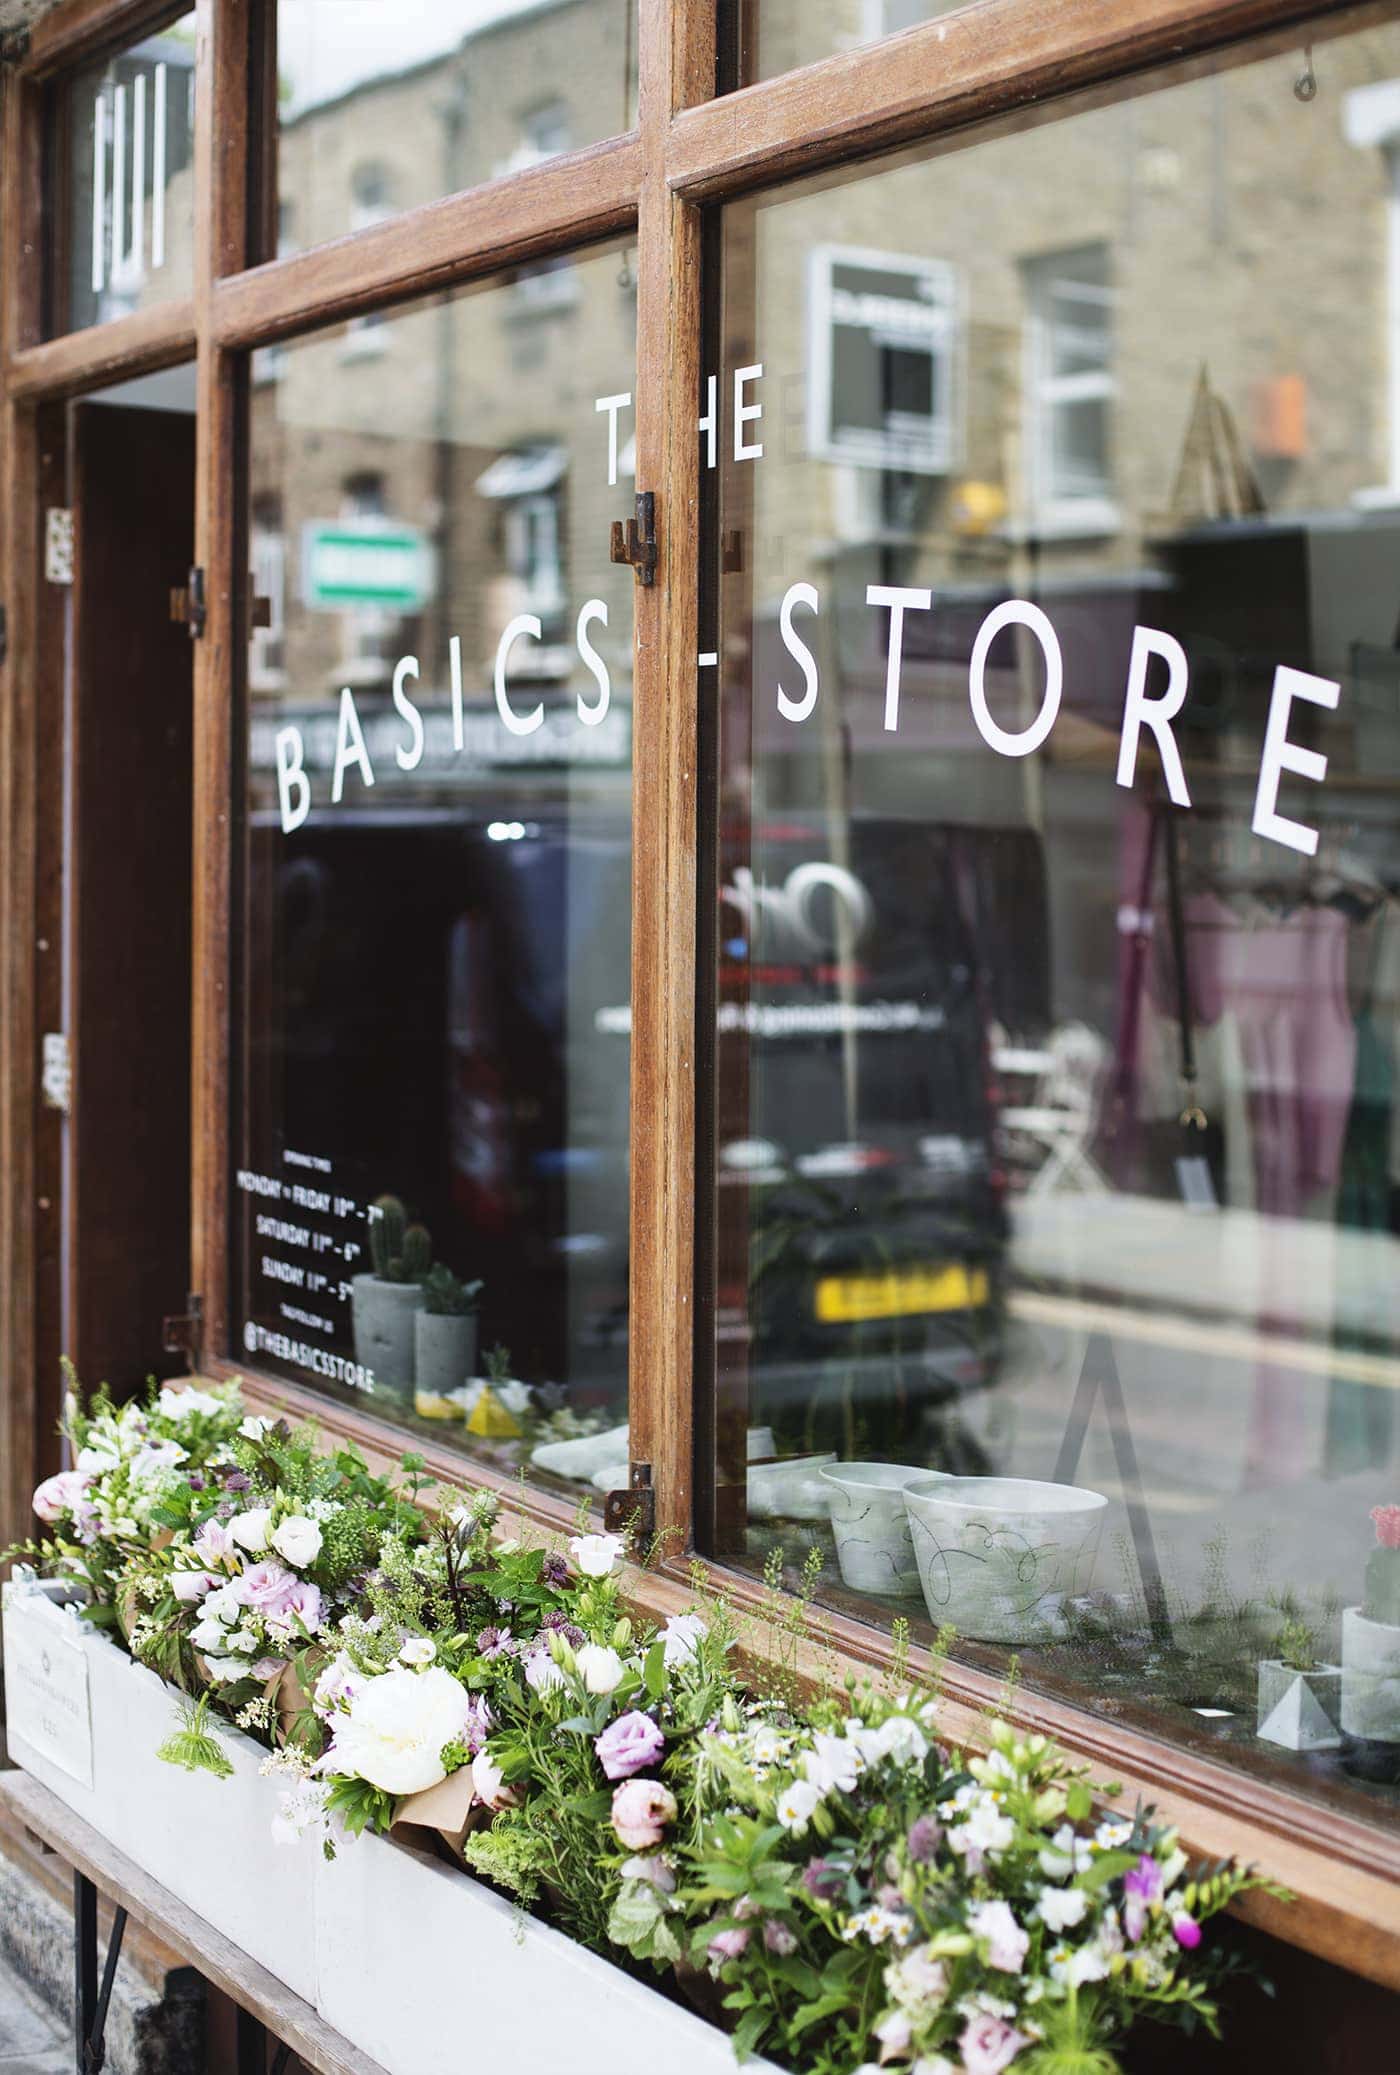 Birthday fun day | The Basics Store shope front